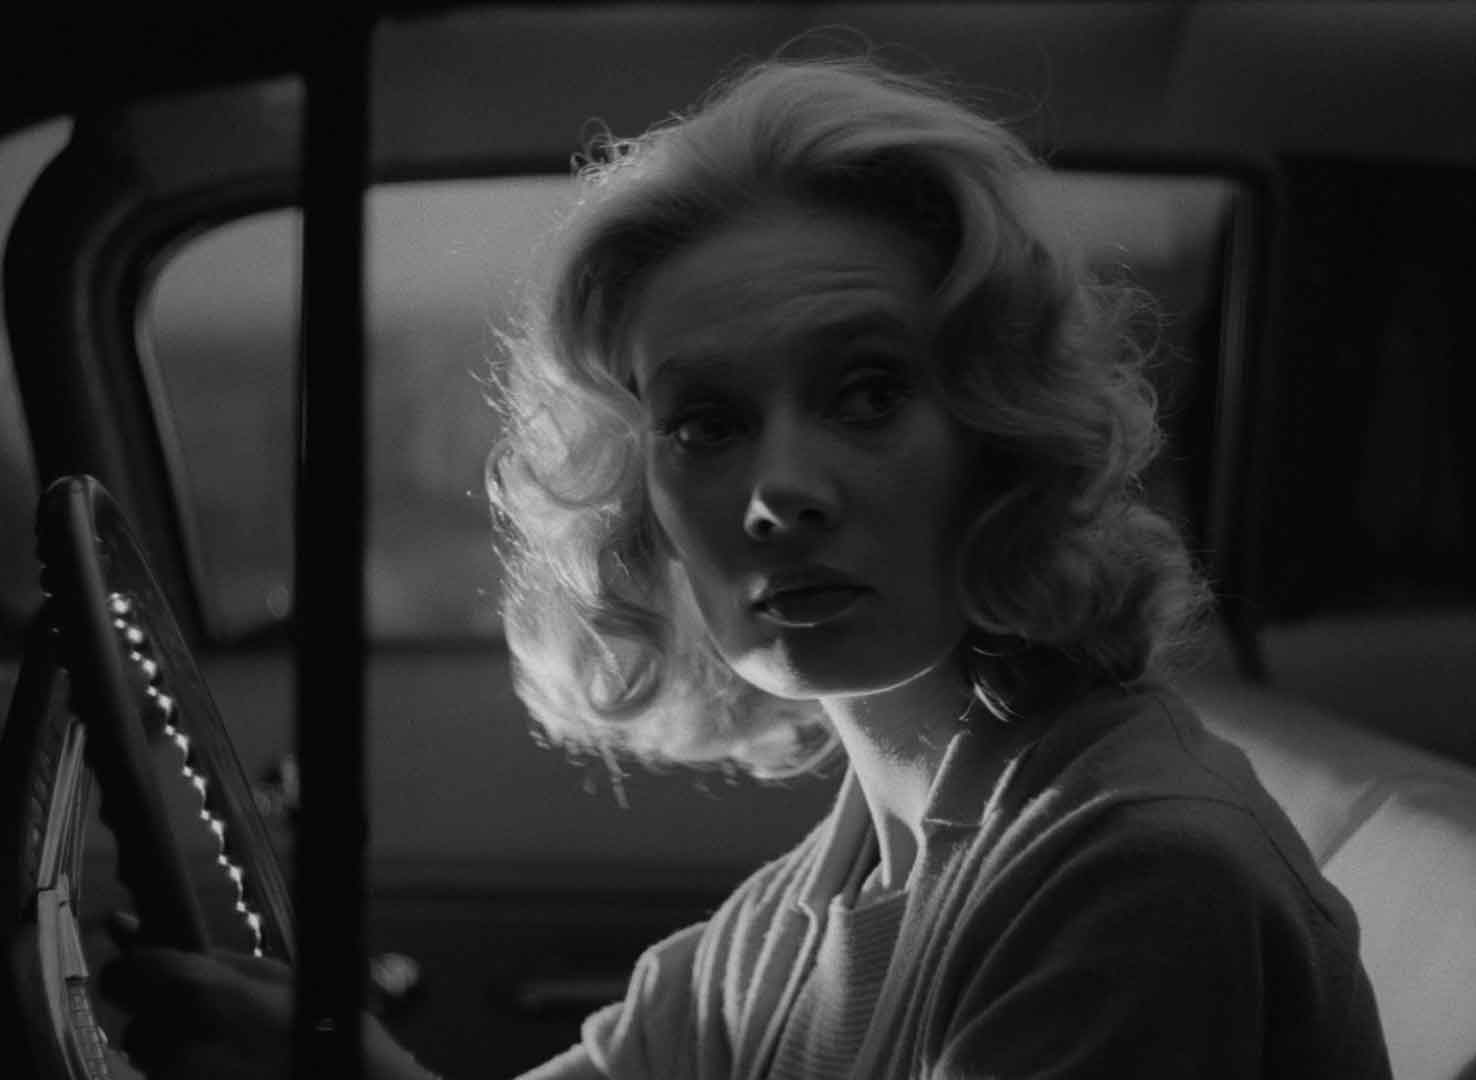 Carnival of Souls review - The Criterion Collection releases the classic danse macabre1476 x 1080